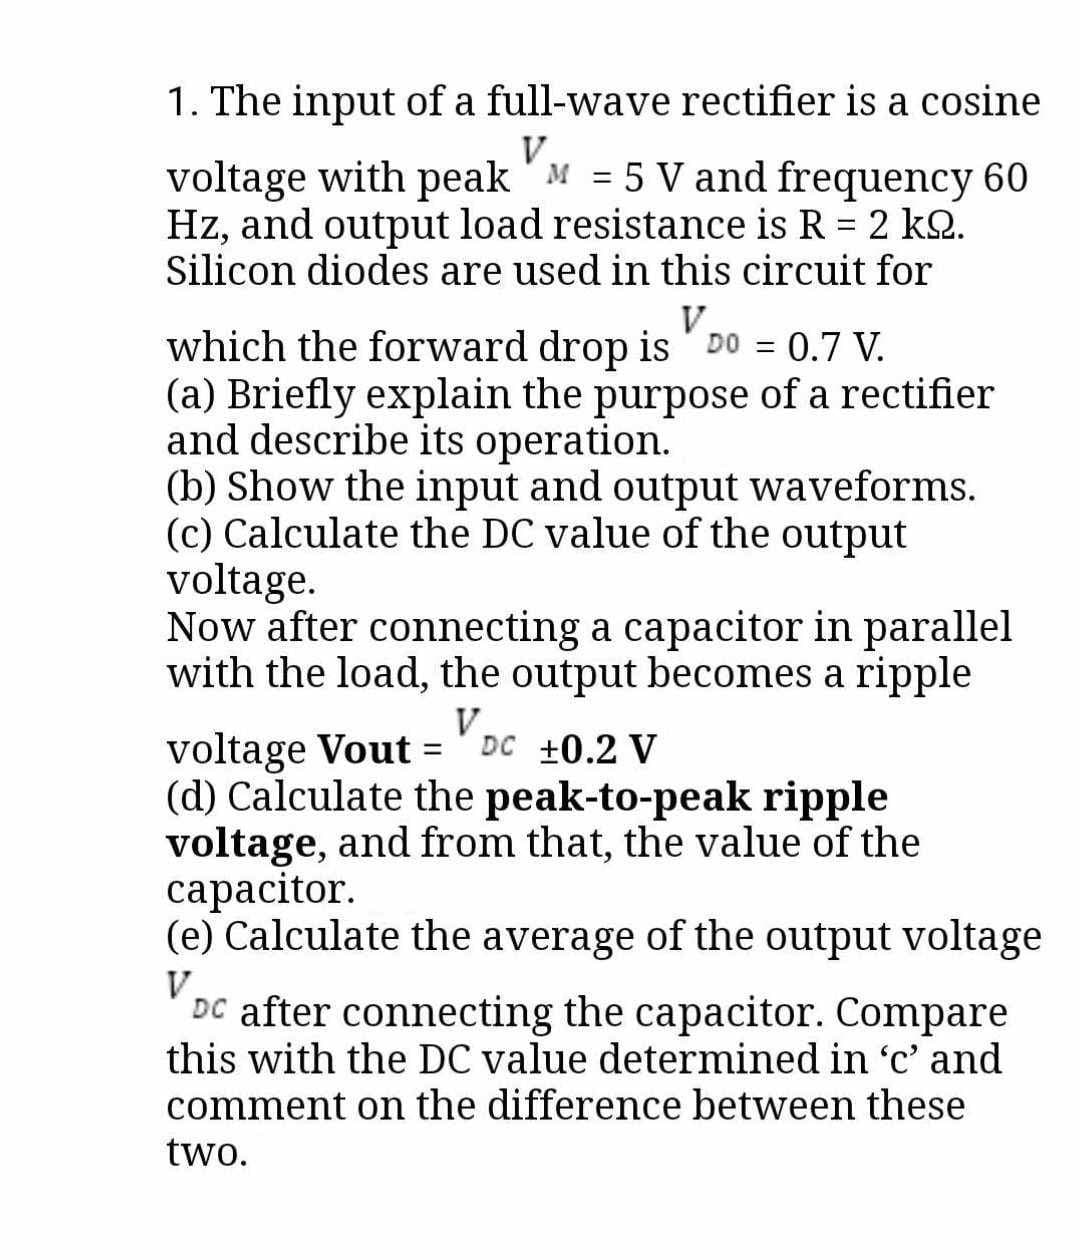 1. The input of a full-wave rectifier is a cosine
V
voltage with peak M = 5 V and frequency 60
Hz, and output load resistance is R = 2 k2.
Silicon diodes are used in this circuit for
V
which the forward drop is DO = 0.7 V.
(a) Briefly explain the purpose of a rectifier
and describe its operation.
(b) Show the input and output waveforms.
(c) Calculate the DC value of the output
voltage.
Now after connecting a capacitor in parallel
with the load, the output becomes a ripple
V
voltage Vout= DC ±0.2 V
(d) Calculate the peak-to-peak ripple
voltage, and from that, the value of the
capacitor.
(e) Calculate the average of the output voltage
V
DC after connecting the capacitor. Compare
this with the DC value determined in 'c' and
comment on the difference between these
two.